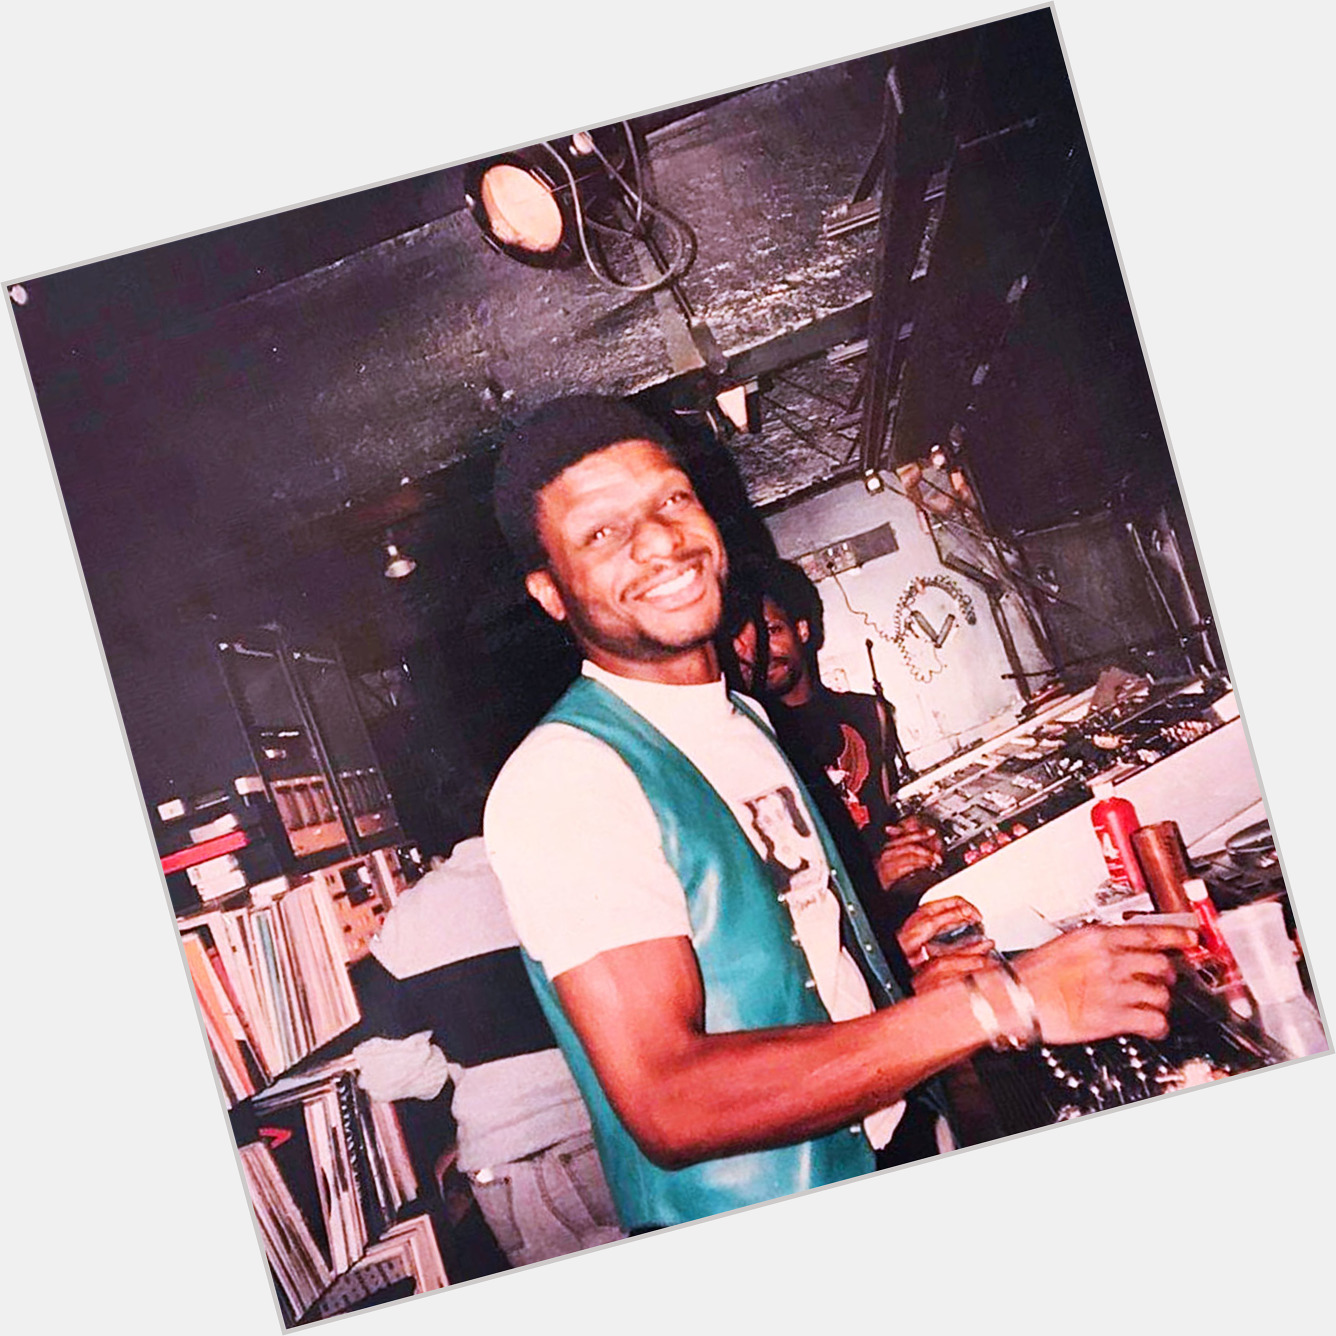 Happy Birthday to house music legend Larry Levan who would have been 67 today! 